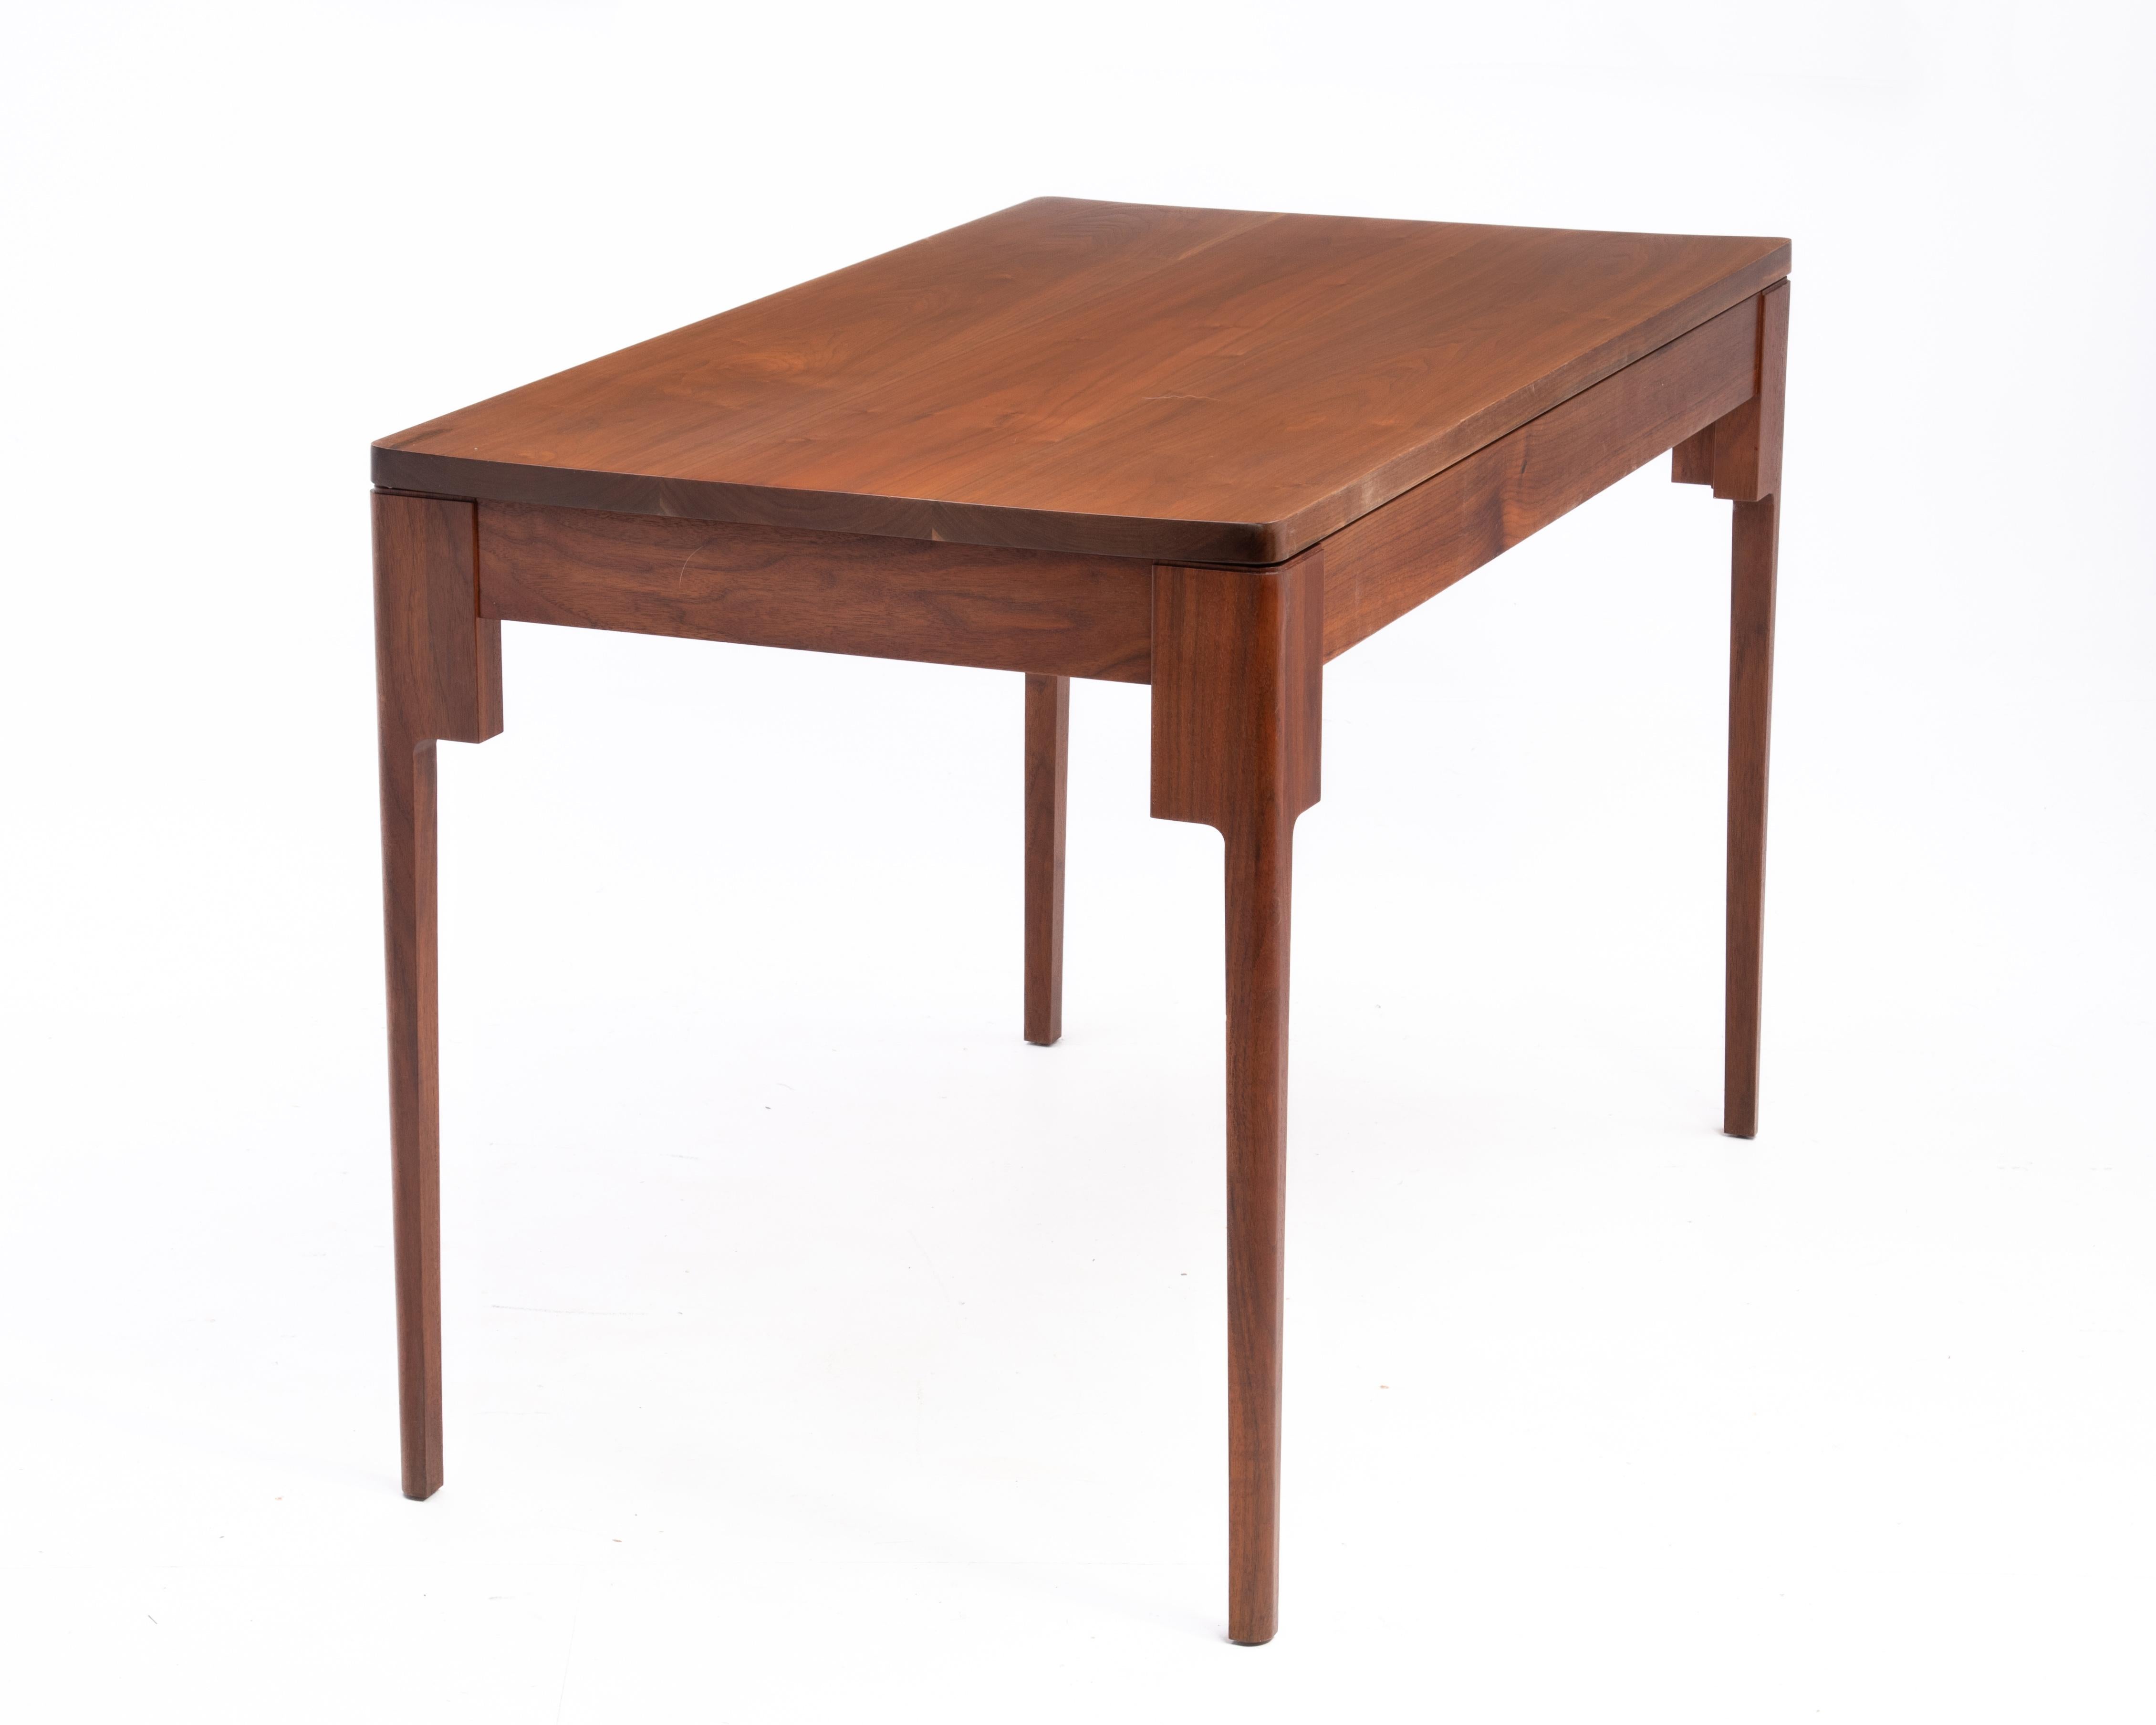 A one of a kind walnut writing table or desk that is large enough to serve as a dining table for four. The piece features solid walnut throughout, a floating top and tapered legs. Custom made, the design is both solid and light.